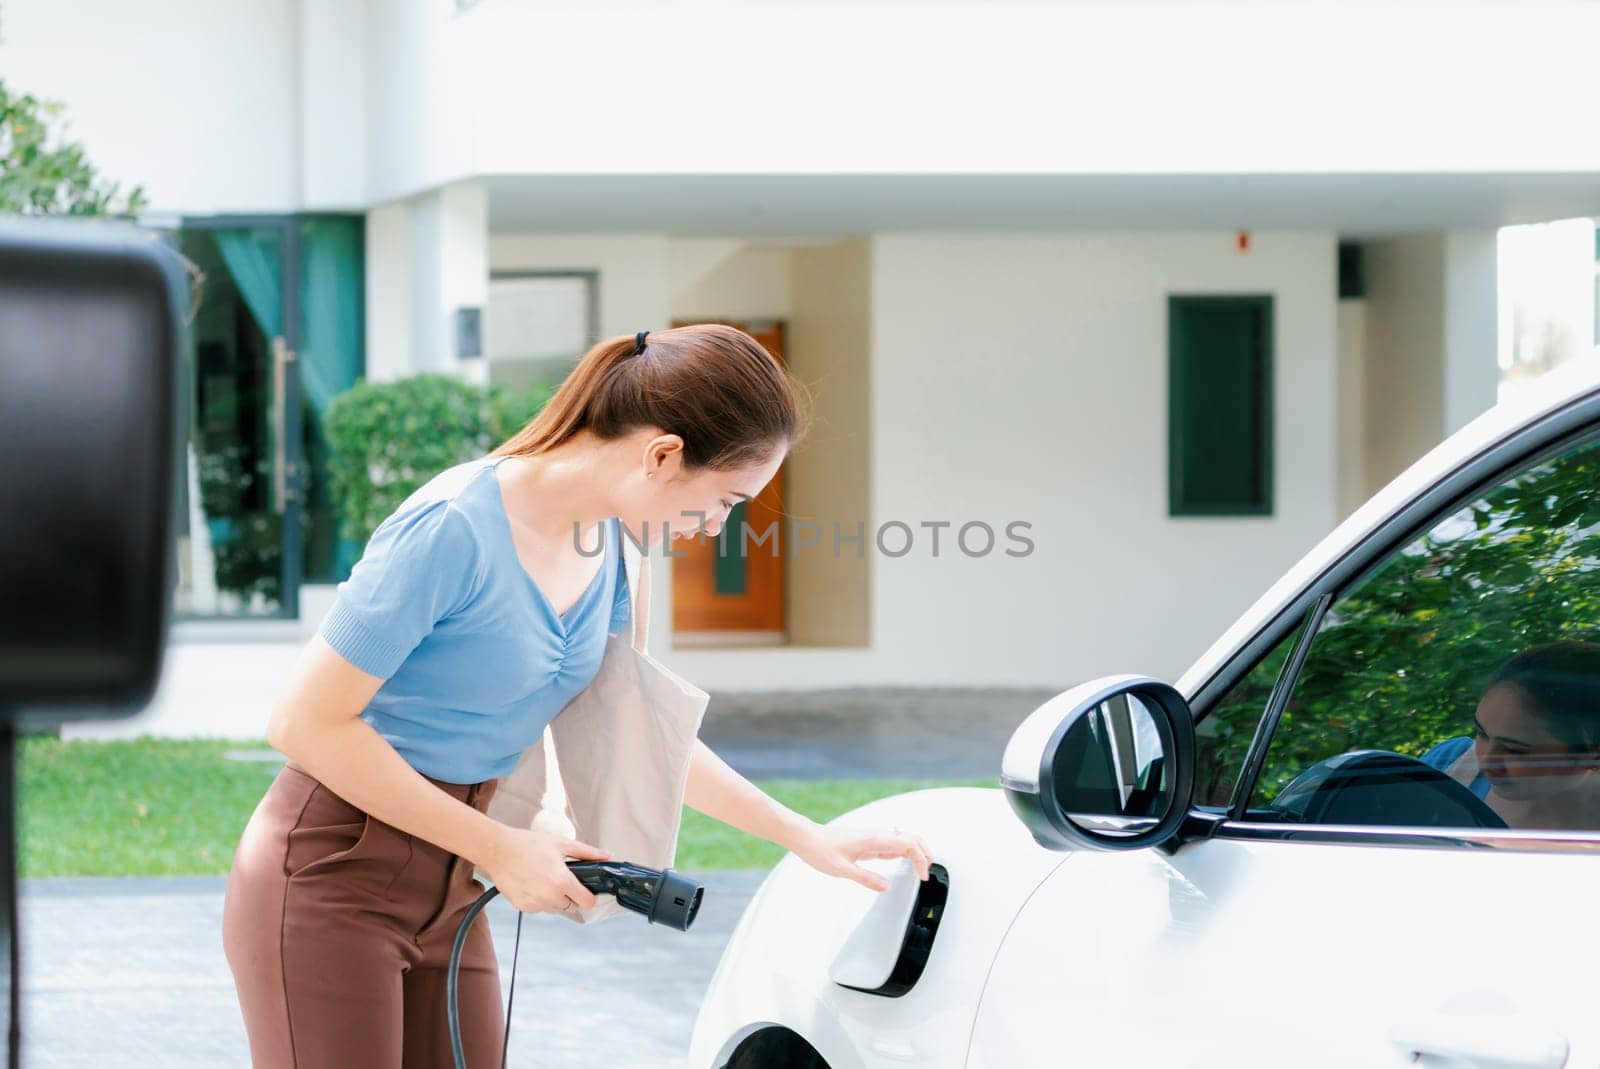 Progressive woman install cable plug to her electric car with home charging station. Concept of the use of electric vehicles in a progressive lifestyle contributes to clean environment.